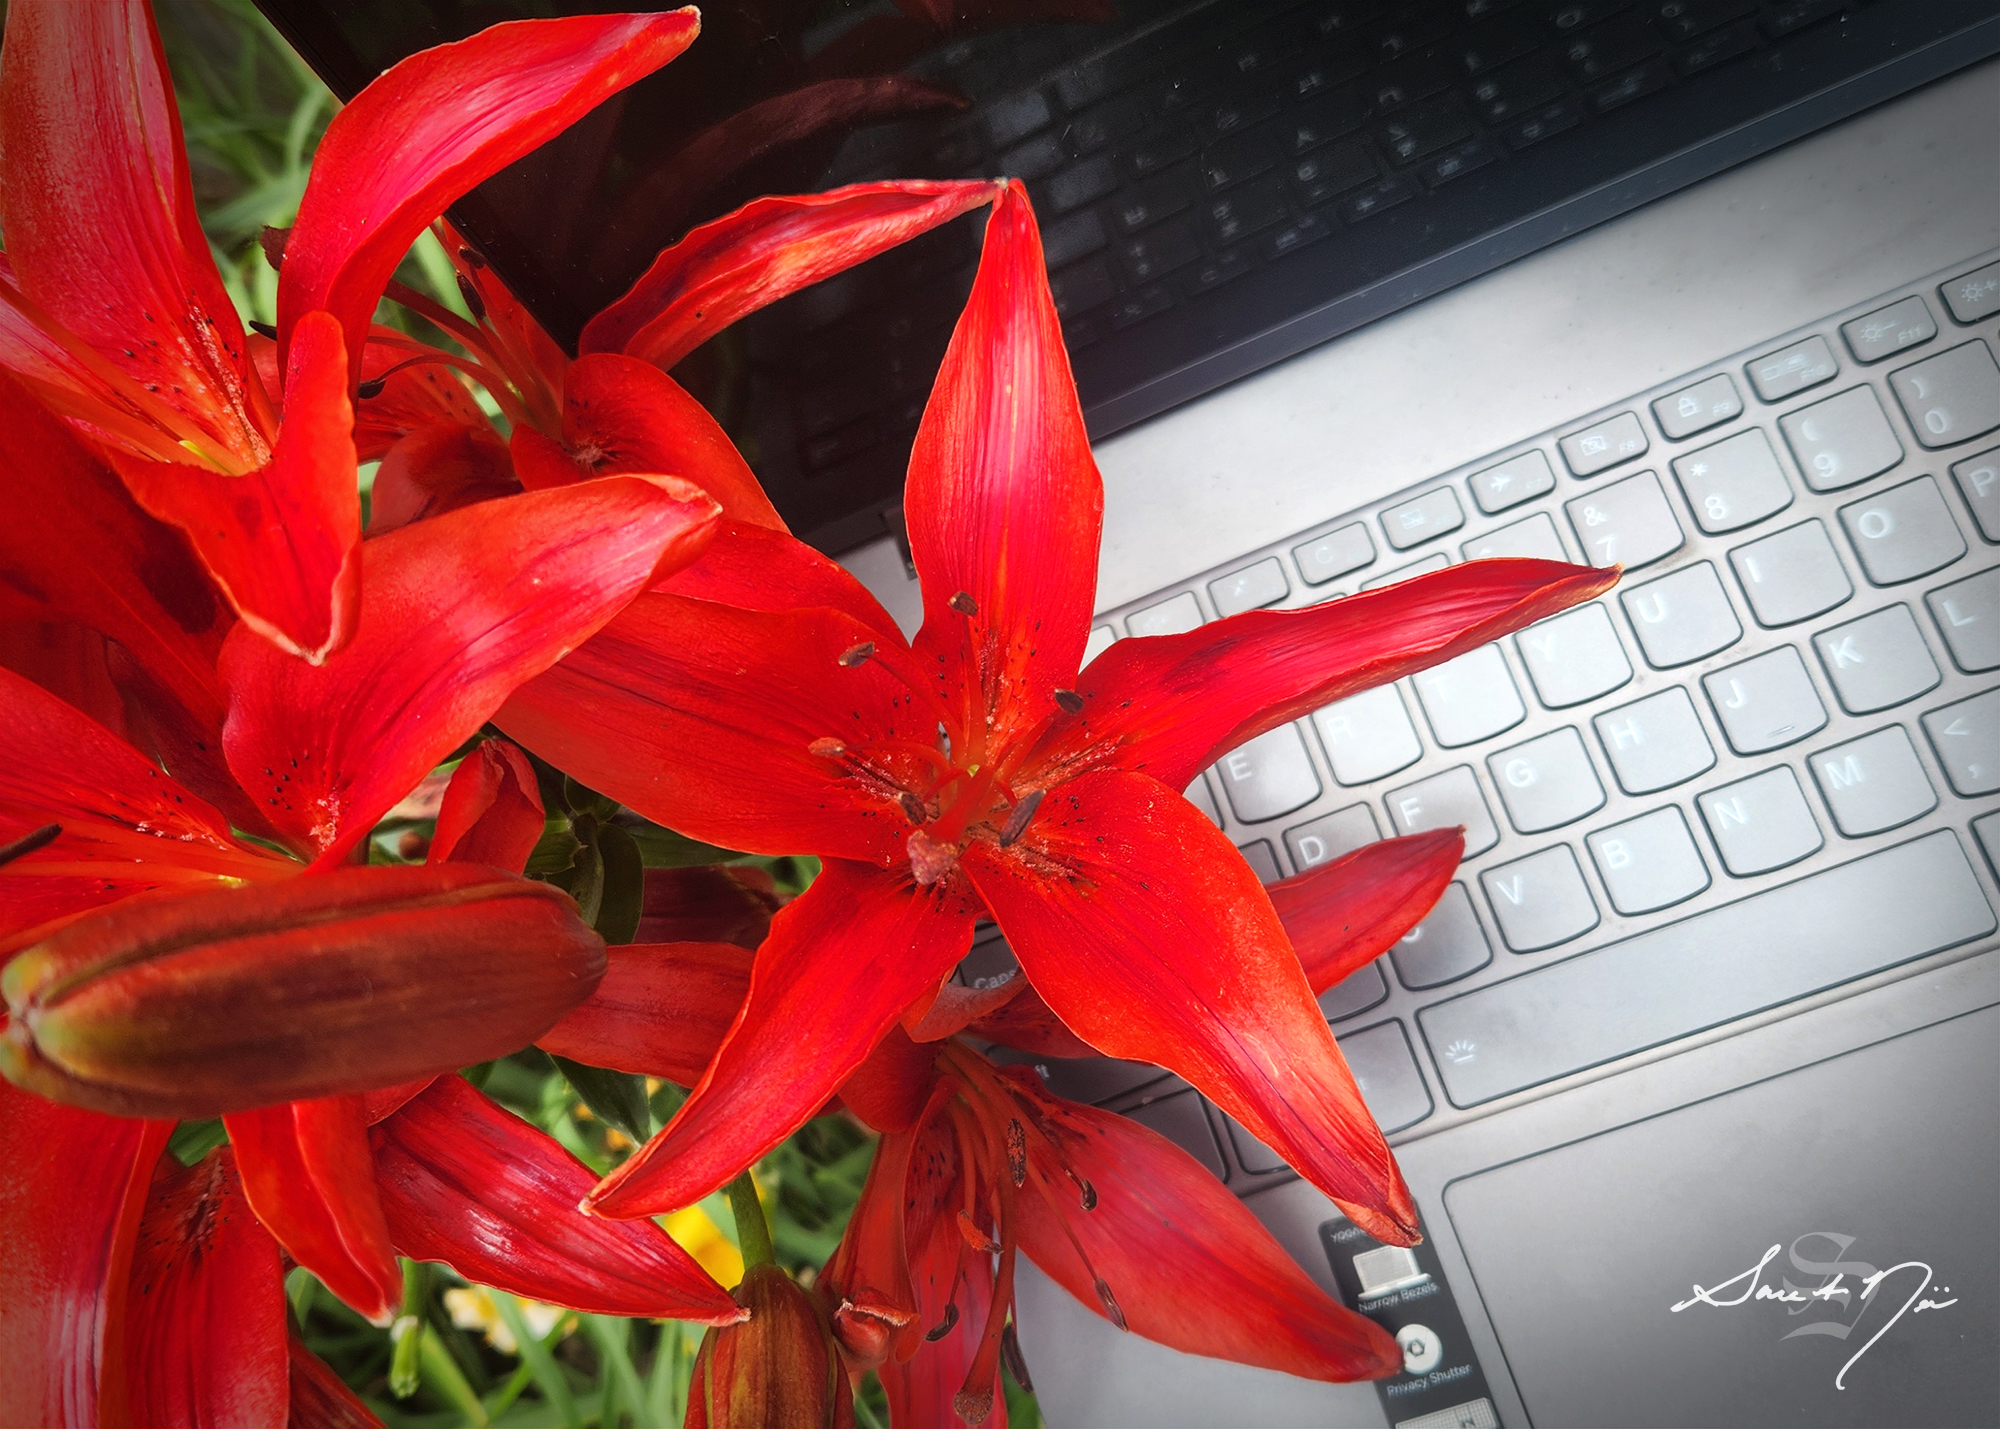 Red lilies on a laptop keyboard